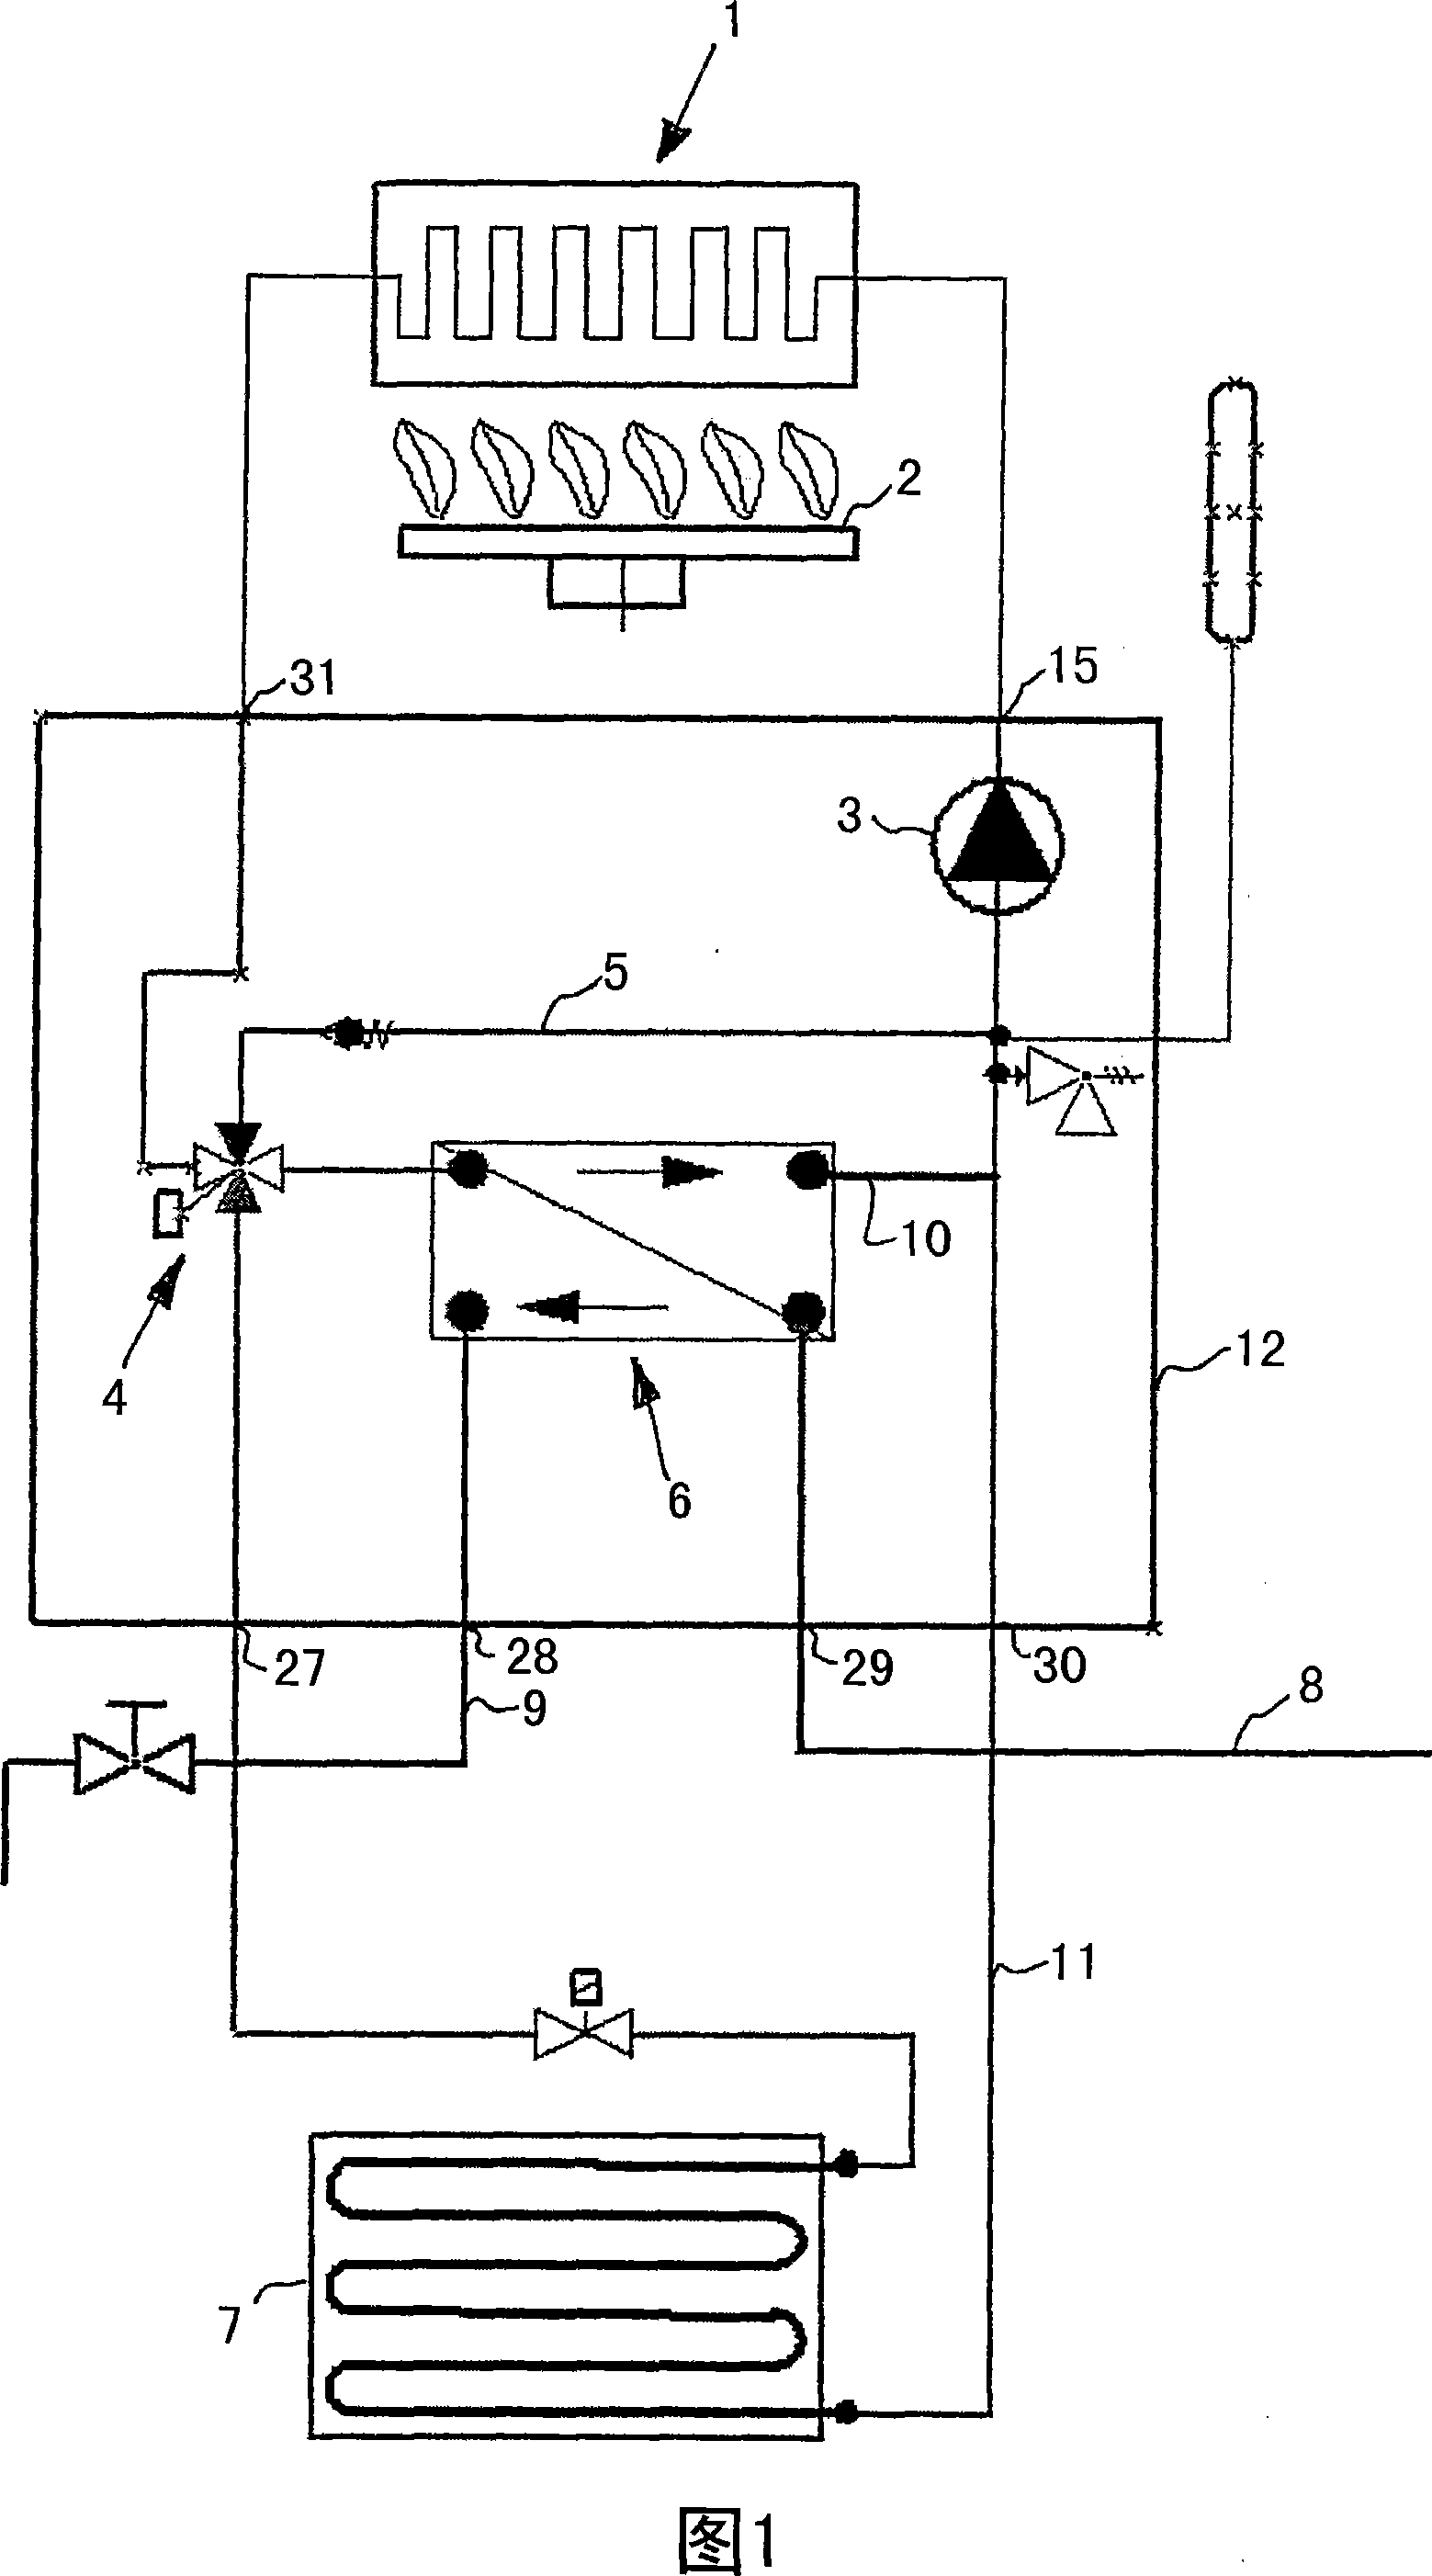 Structure unit of heating installation